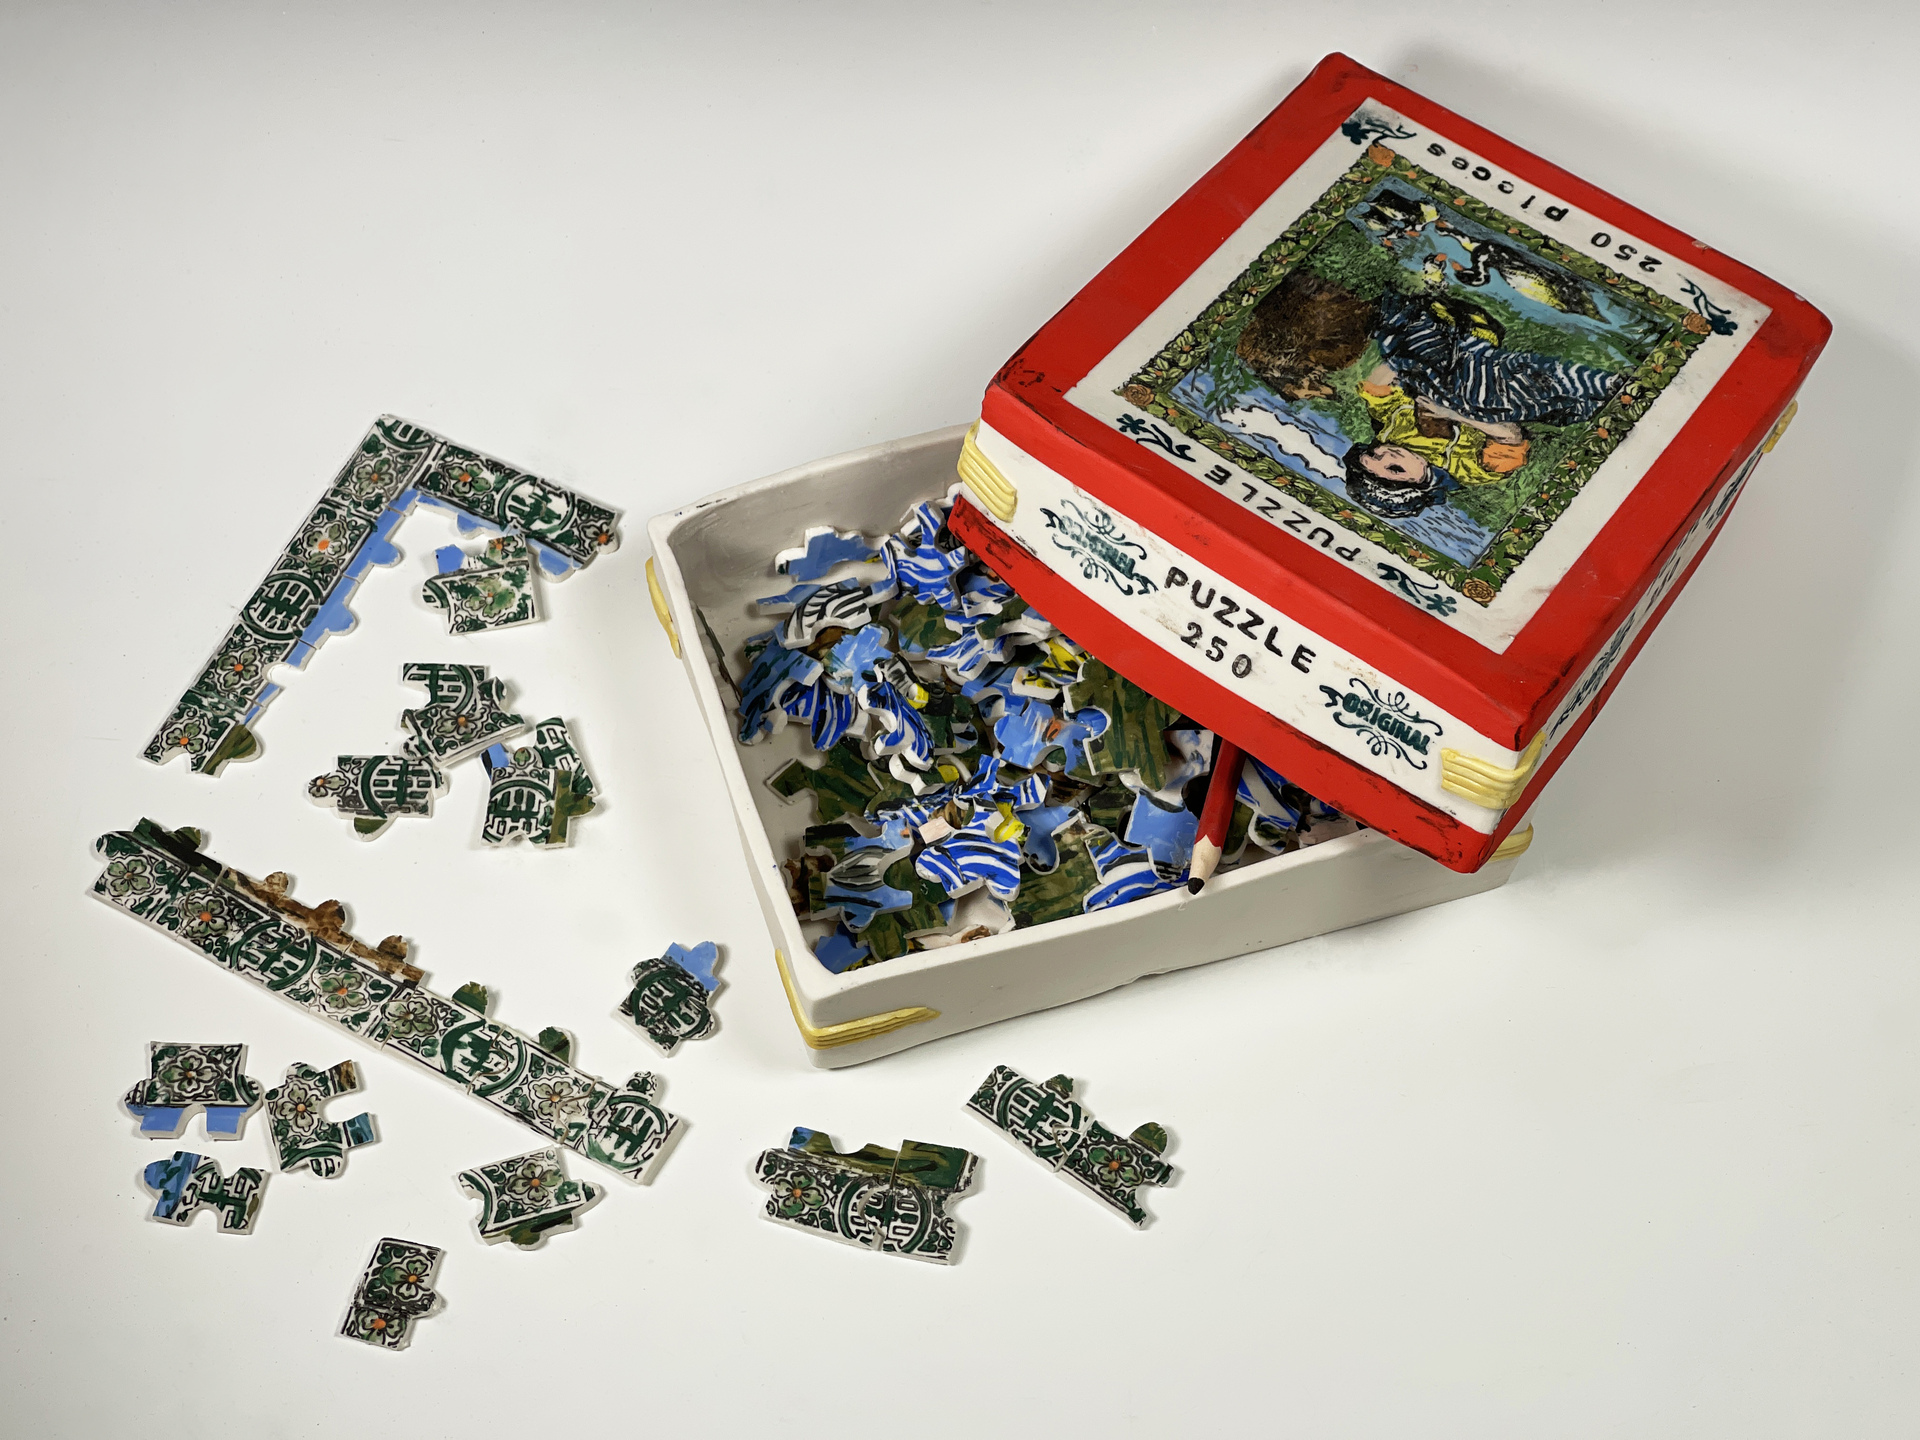 Suzanne Sidebottom used porcelain clay, underglazes  to create a realistic image of a box of puzzle pieces with pieces scattered around it. The box top is a realistic rendering of picture of the finished puzzle.